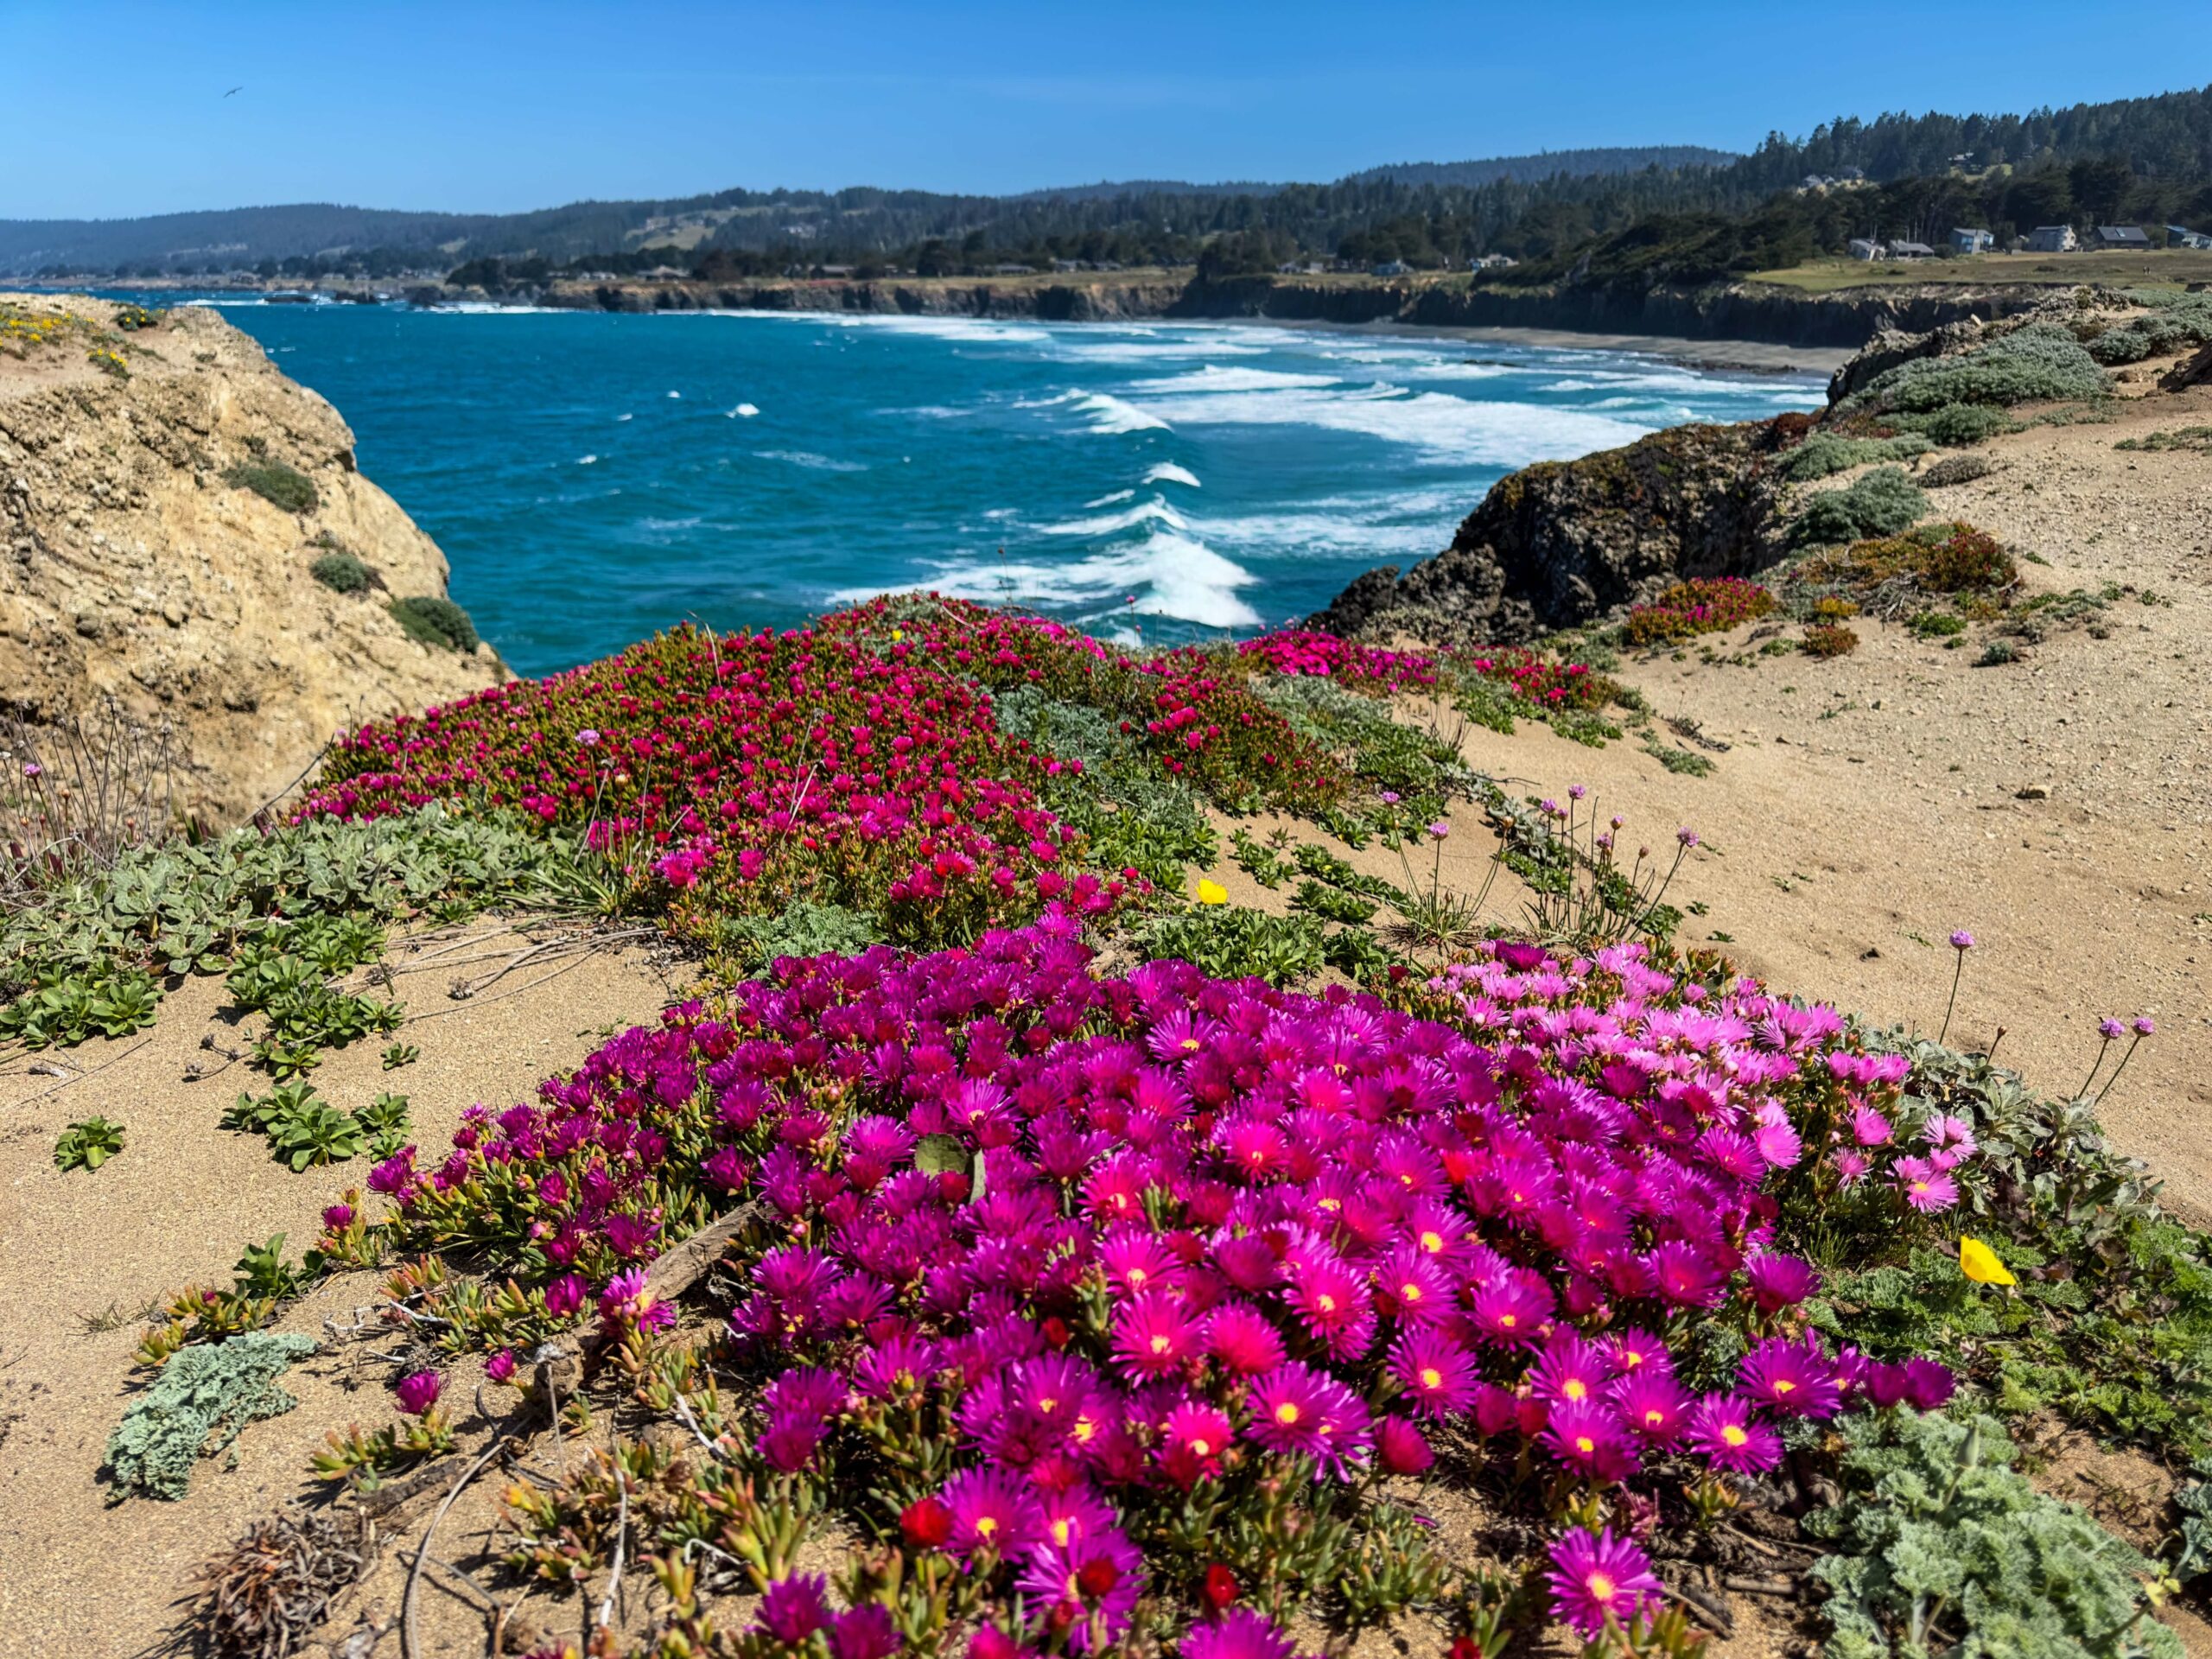 Mare Vista: rocky sandy beach with blooming pink flowers and view of ocean